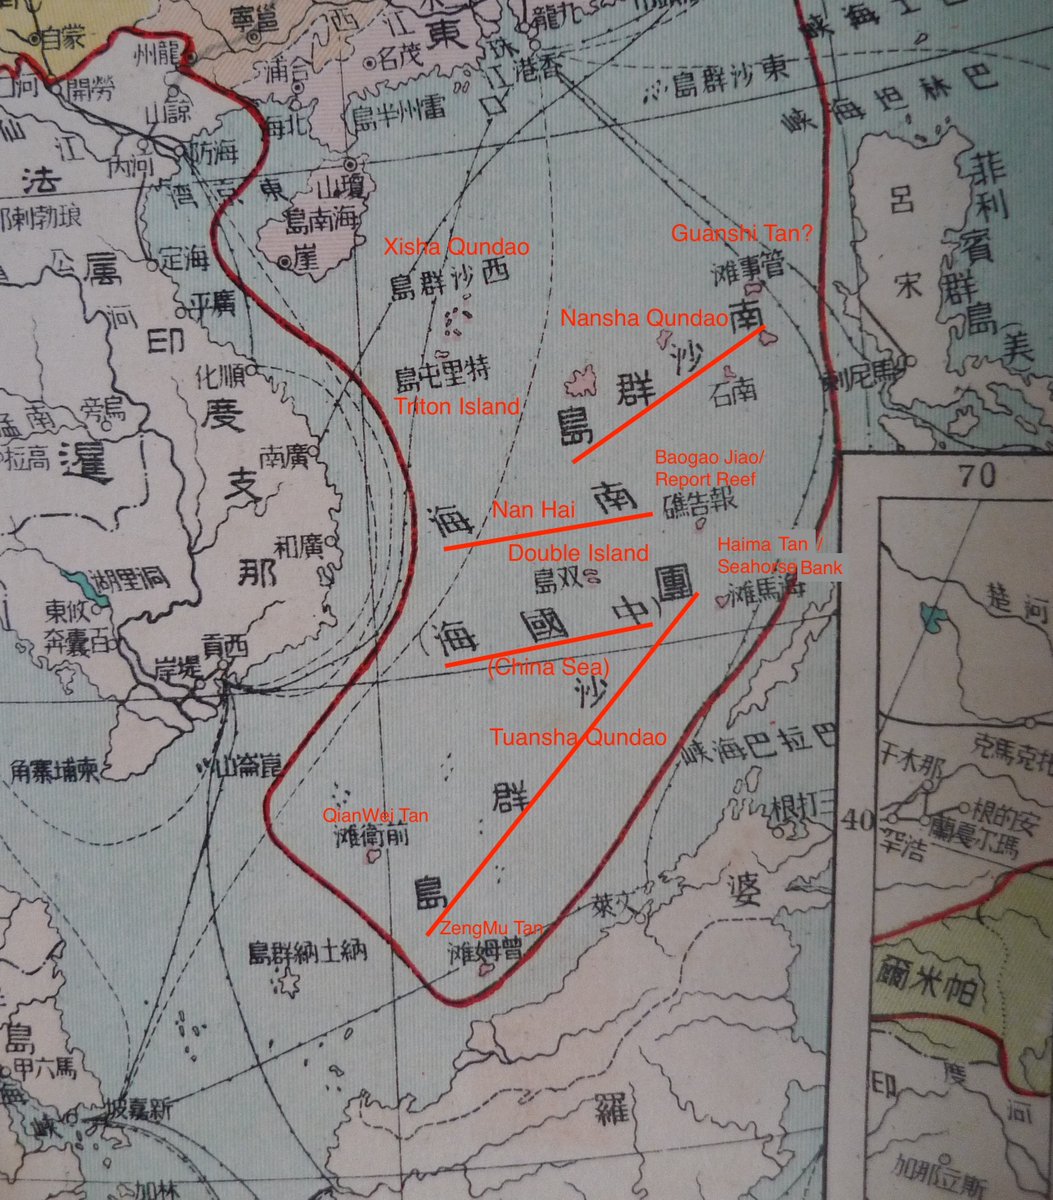 Here it is marked as such on Bai's map...